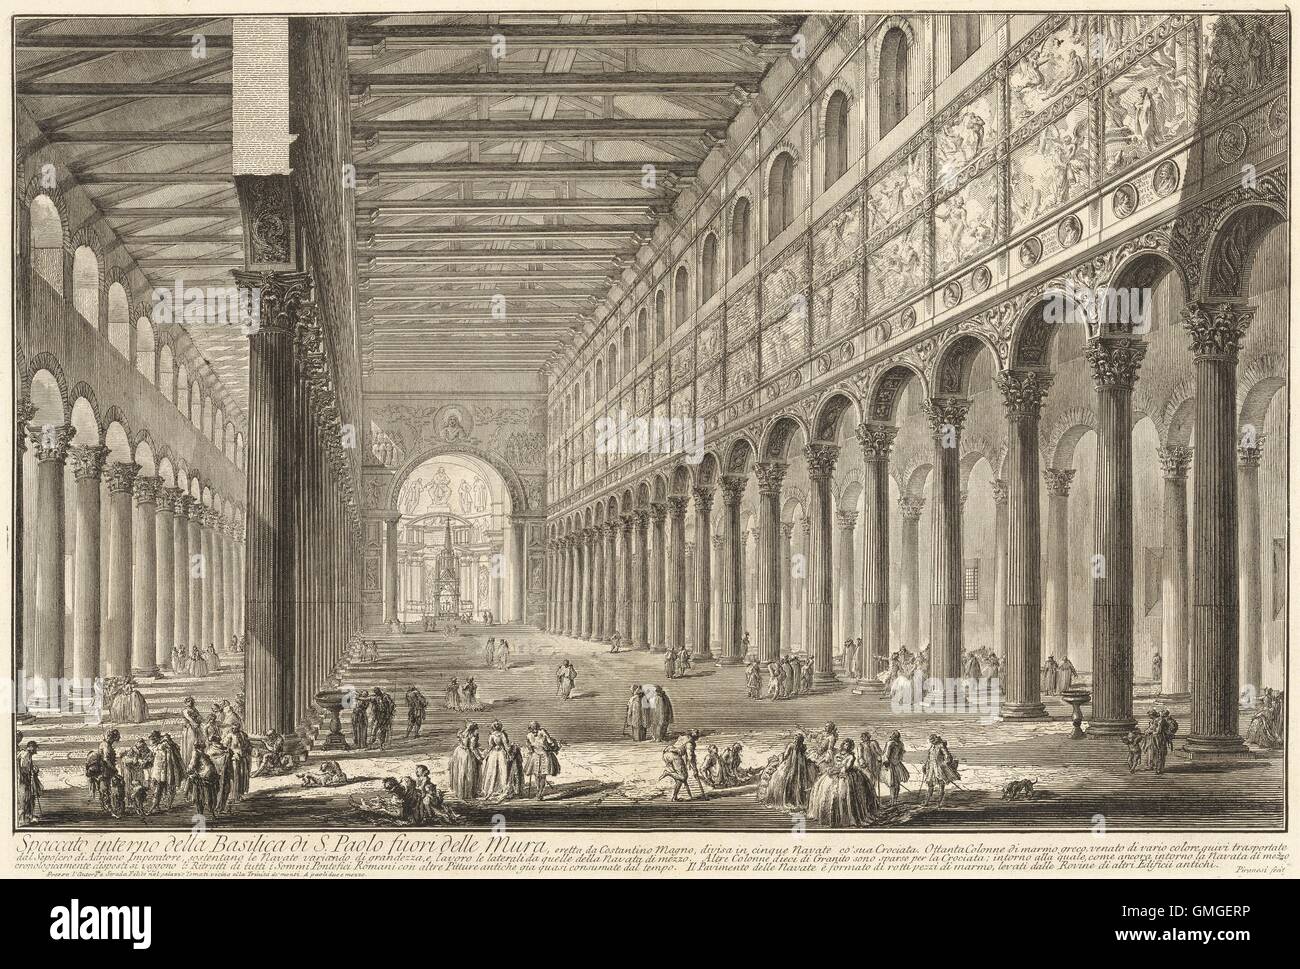 Internal cross-section of St. Paul Outside the Walls, by Giovanni Battista Piranesi, 1748-49, Italian print, engraving. Construction of this Early Christian basilica, began in Rome in 386 at the site of St. Paul's martyrdom. It was almost totally destroye (BSLOC 2016 6 246) Stock Photo